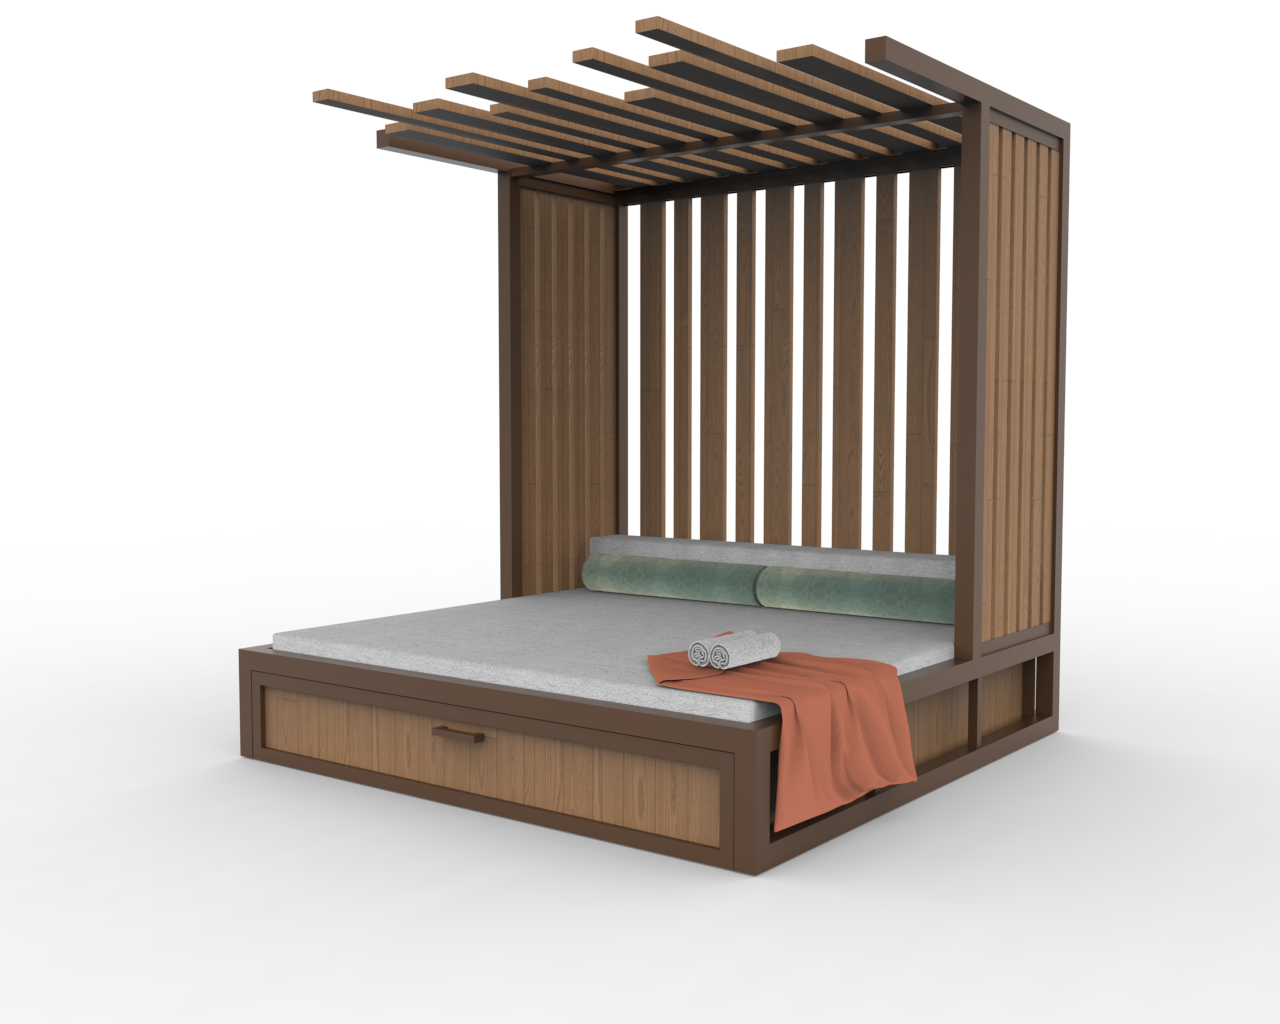 Academy Design's Castaway daybed, right perspective view, showcasing its durable 6061-T6 aluminum frame. The right side features an aluminum box grid with storage compartments, while the roof and back side are adorned with slats, either in natural hardwood or powder-coated aluminum, offering a blend of luxury and functionality.